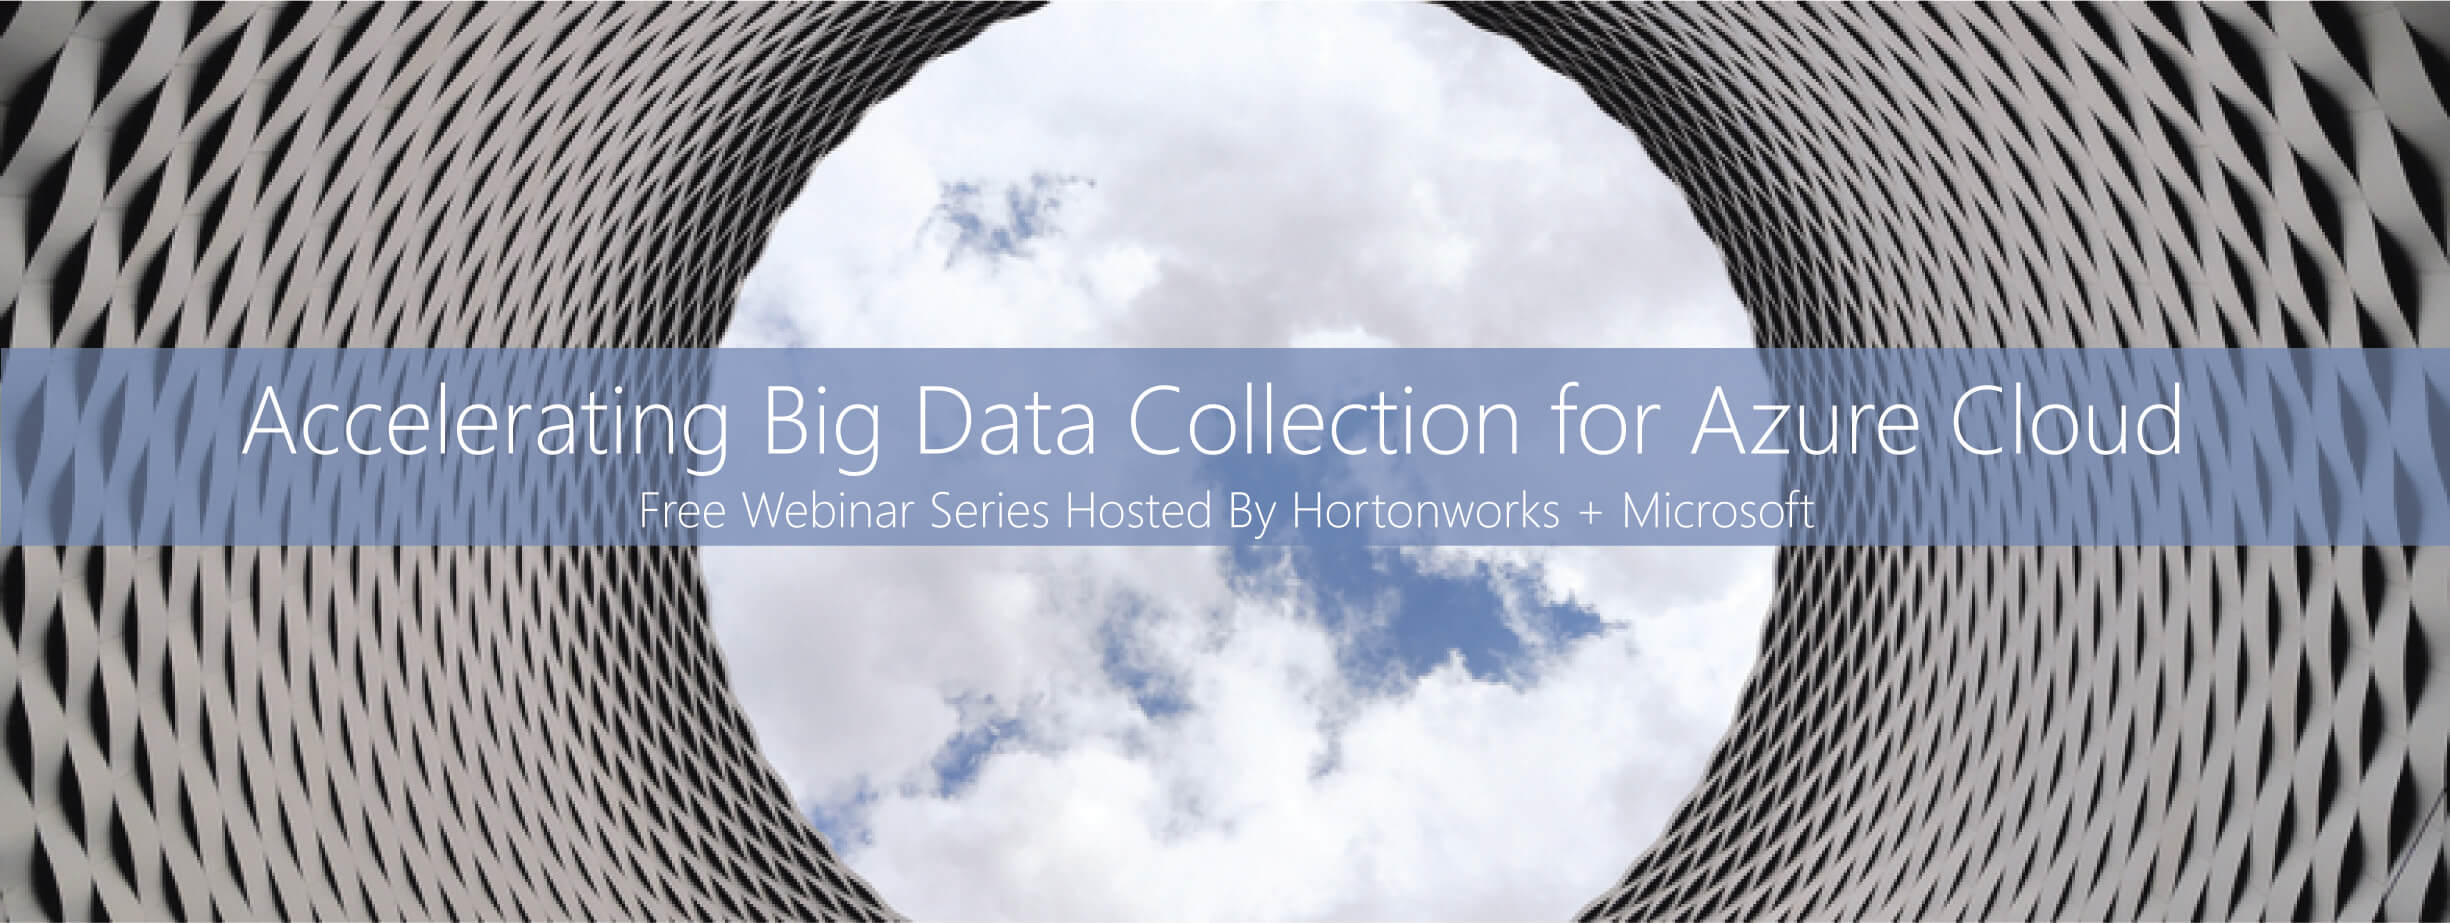 Free Webinar Event from Hortonworks and Microsoft - Accelerating Big Data Collection for Azure Cloud